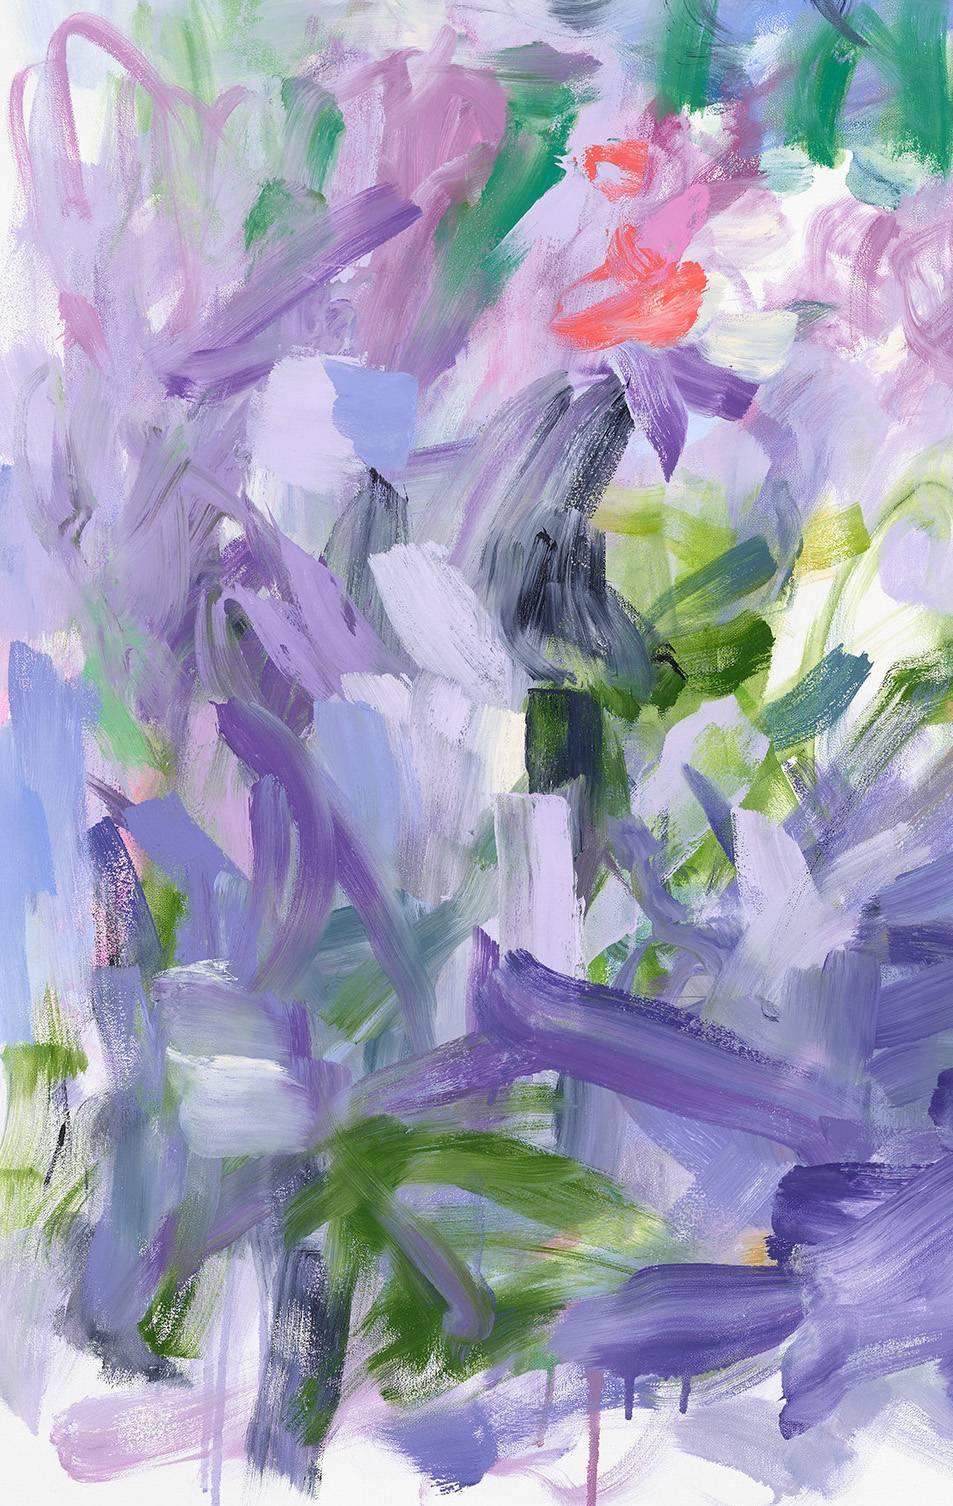 Yolanda Sánchez's Sweet Surrender is a beautiful, abstract oil painting. Shades of purple, violet blue, and green dance around the canvas. Hints of pink and yellow-green illuminate the cooler tones.

Sánchez's paintings are a search for